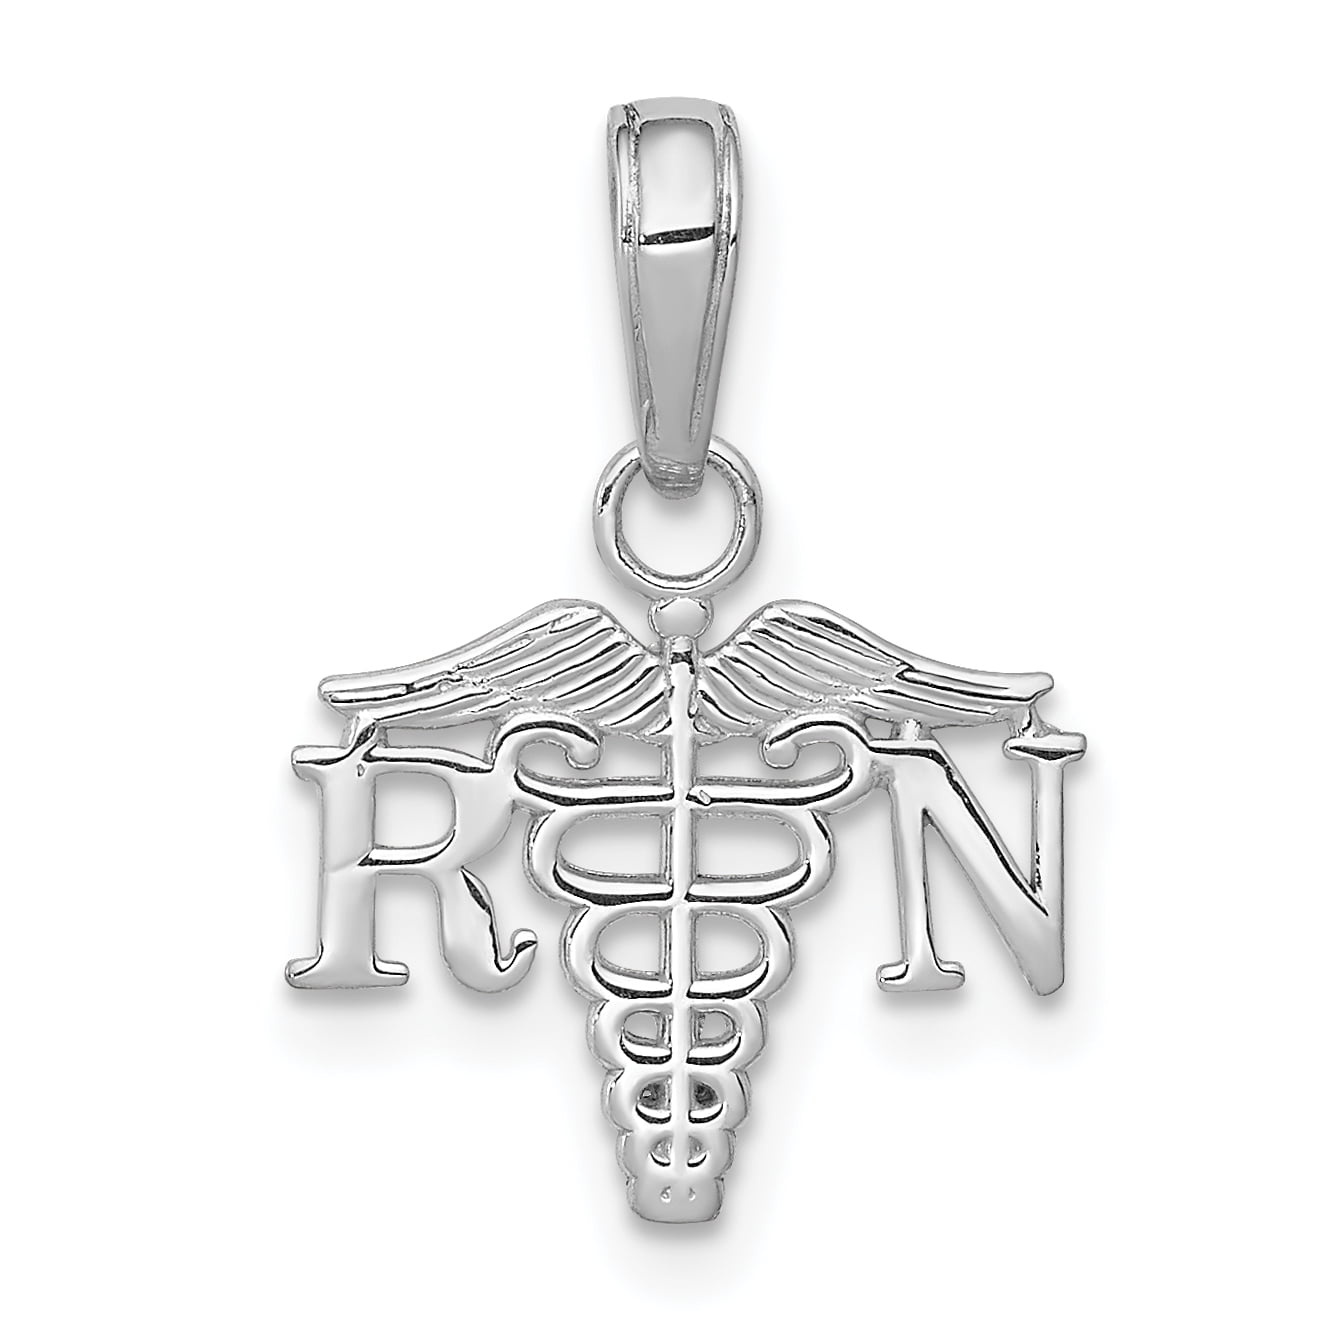 Jewelry Stores Network - Wide 14k White Gold RN Letters And Caduceus ...